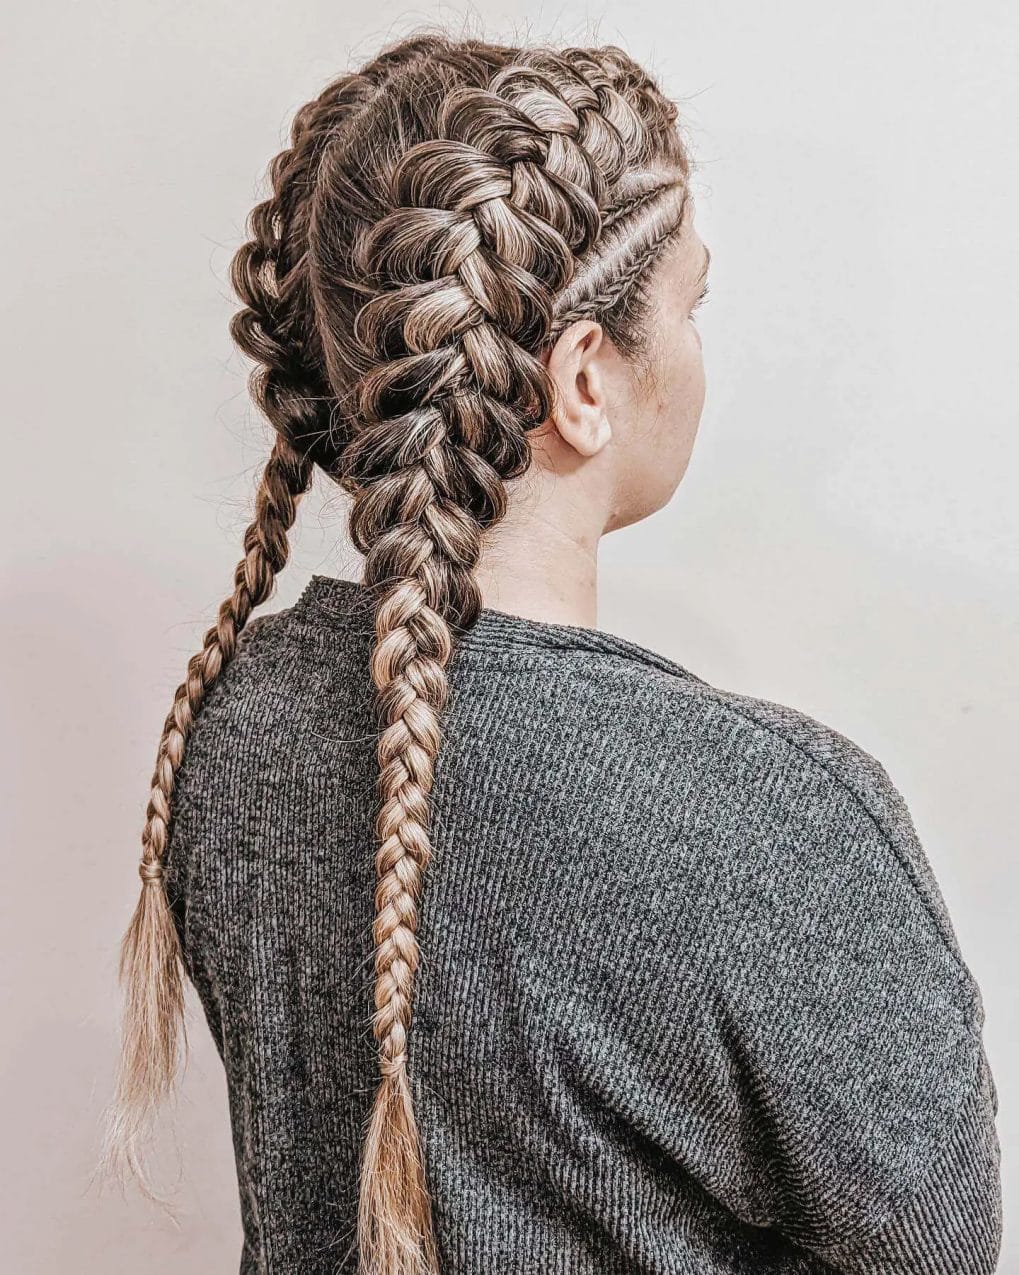 Symmetrical French braids merging into blonde-tipped ponytails.